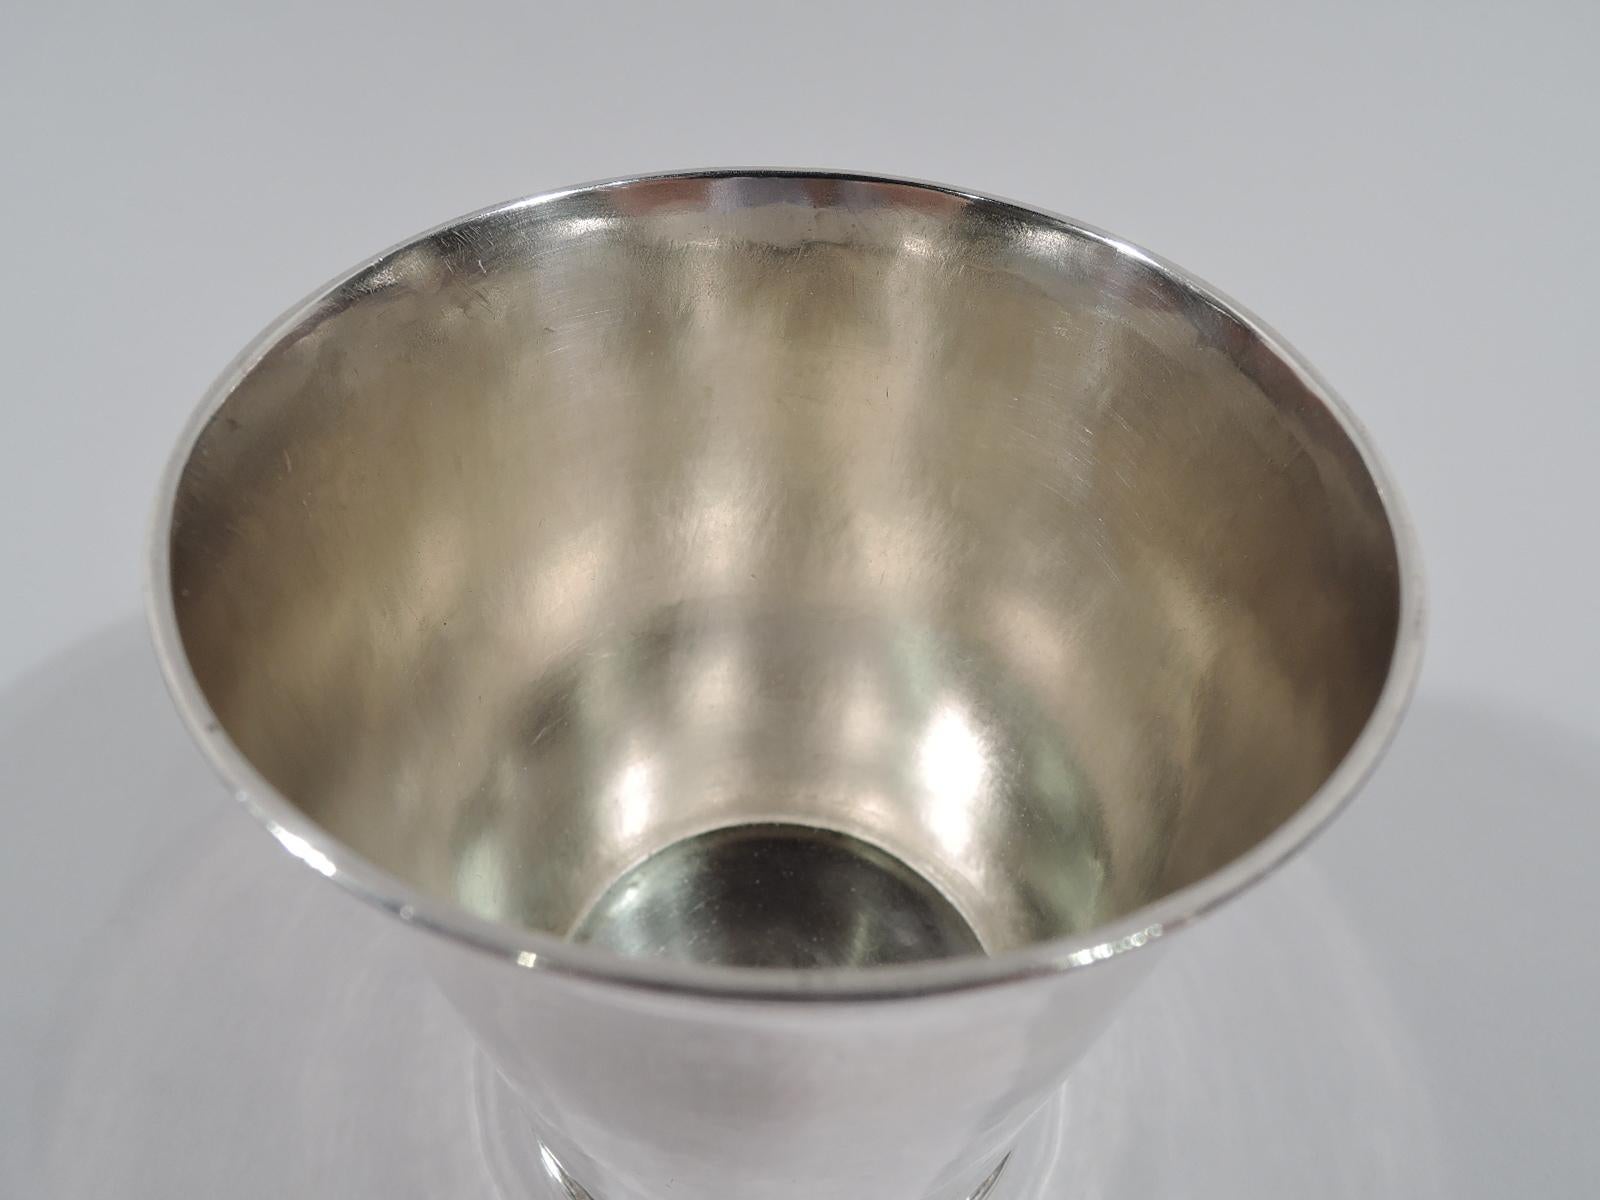 Rare Charles II sterling silver beaker, 1667. Tapering sides with flared rim and reeded foot. Block letter E engraved on underside. Fully marked including London assay stamp and maker’s initials WS (possibly William Scarlett). Weight: 4.4 troy